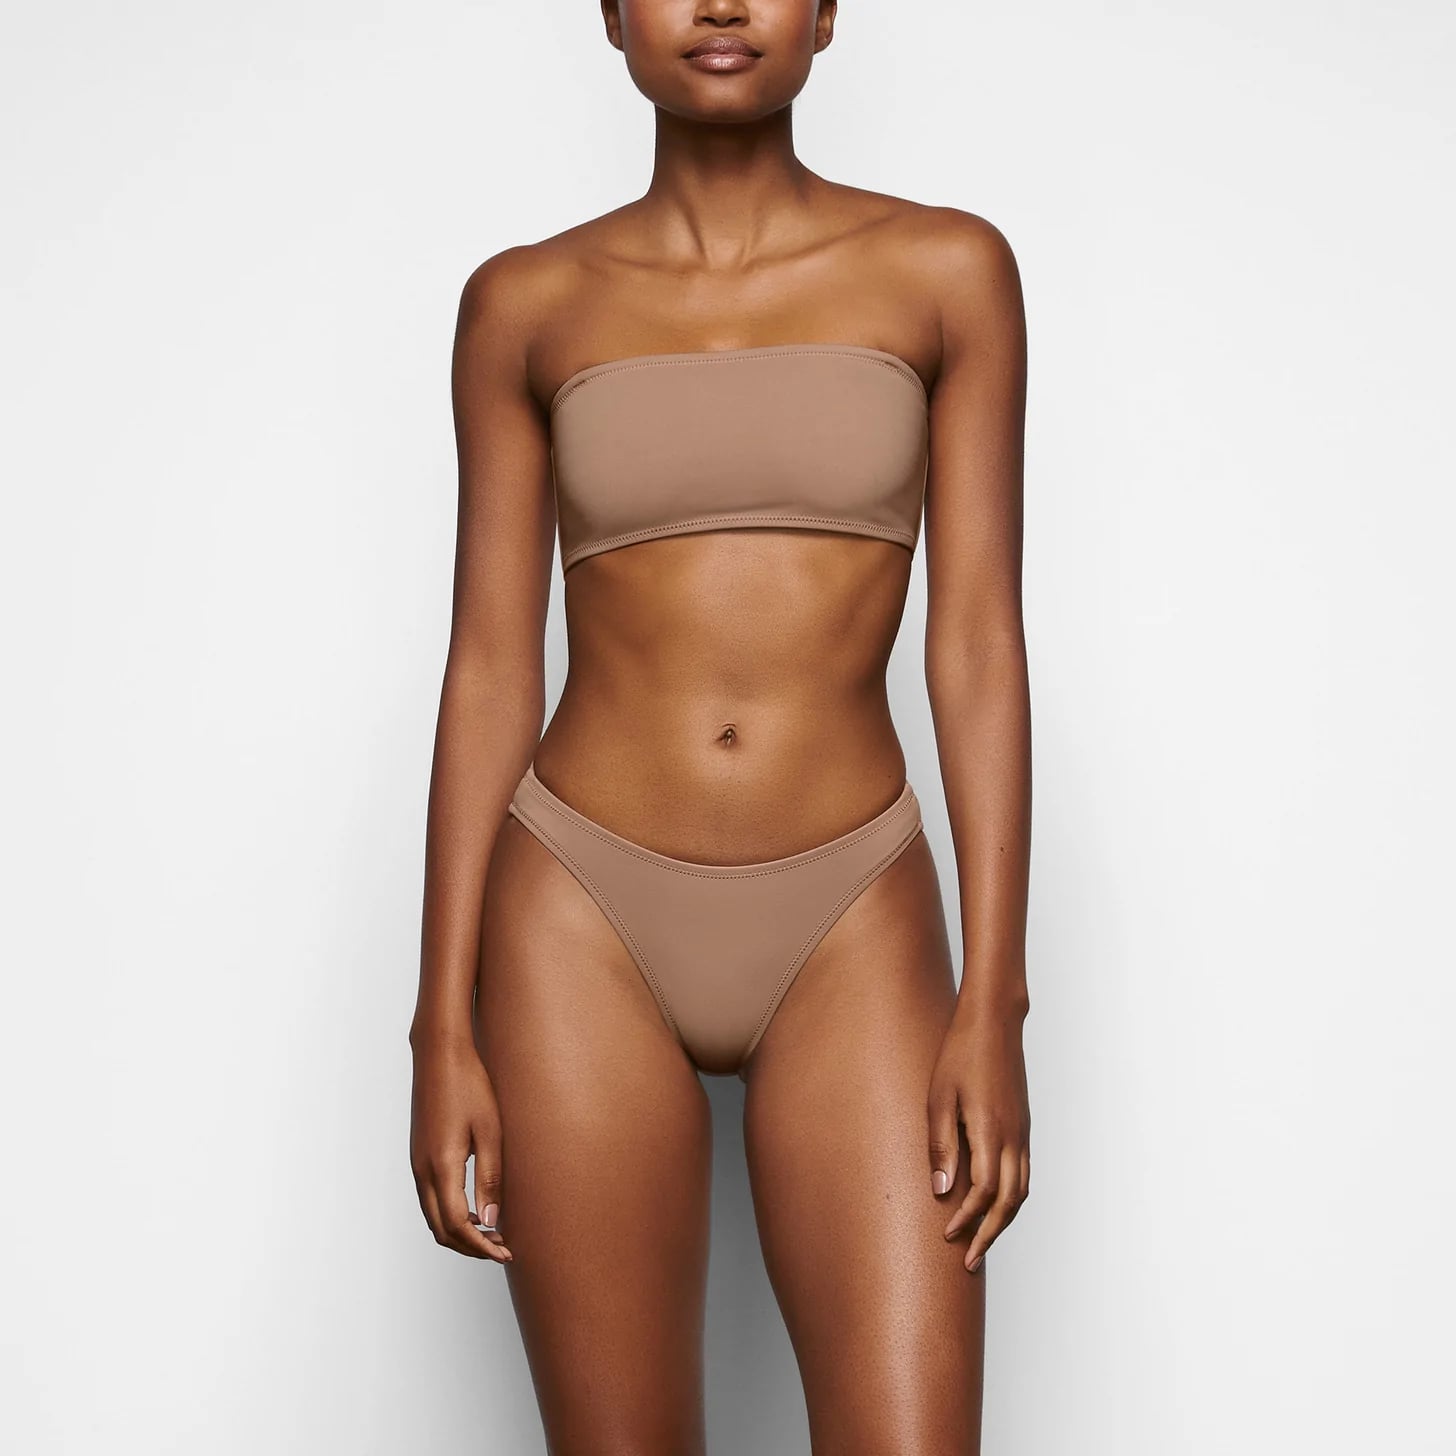 Editor Review of SKIMS Swimwear Collection